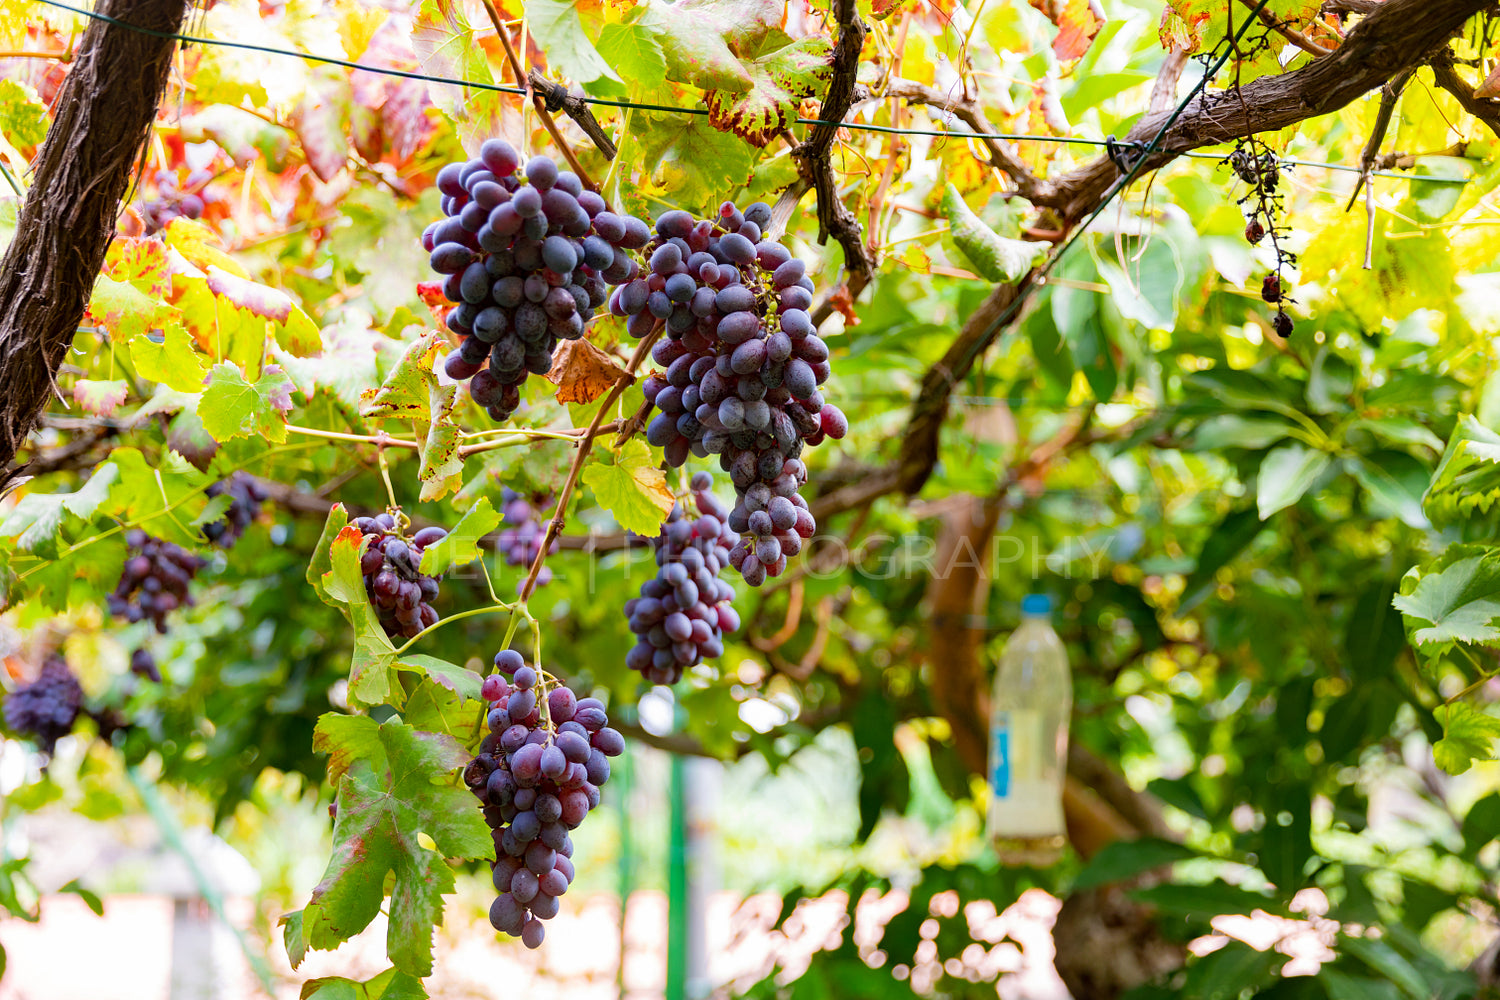 Bunches of grapes for Wine Production Growing At Vineyard